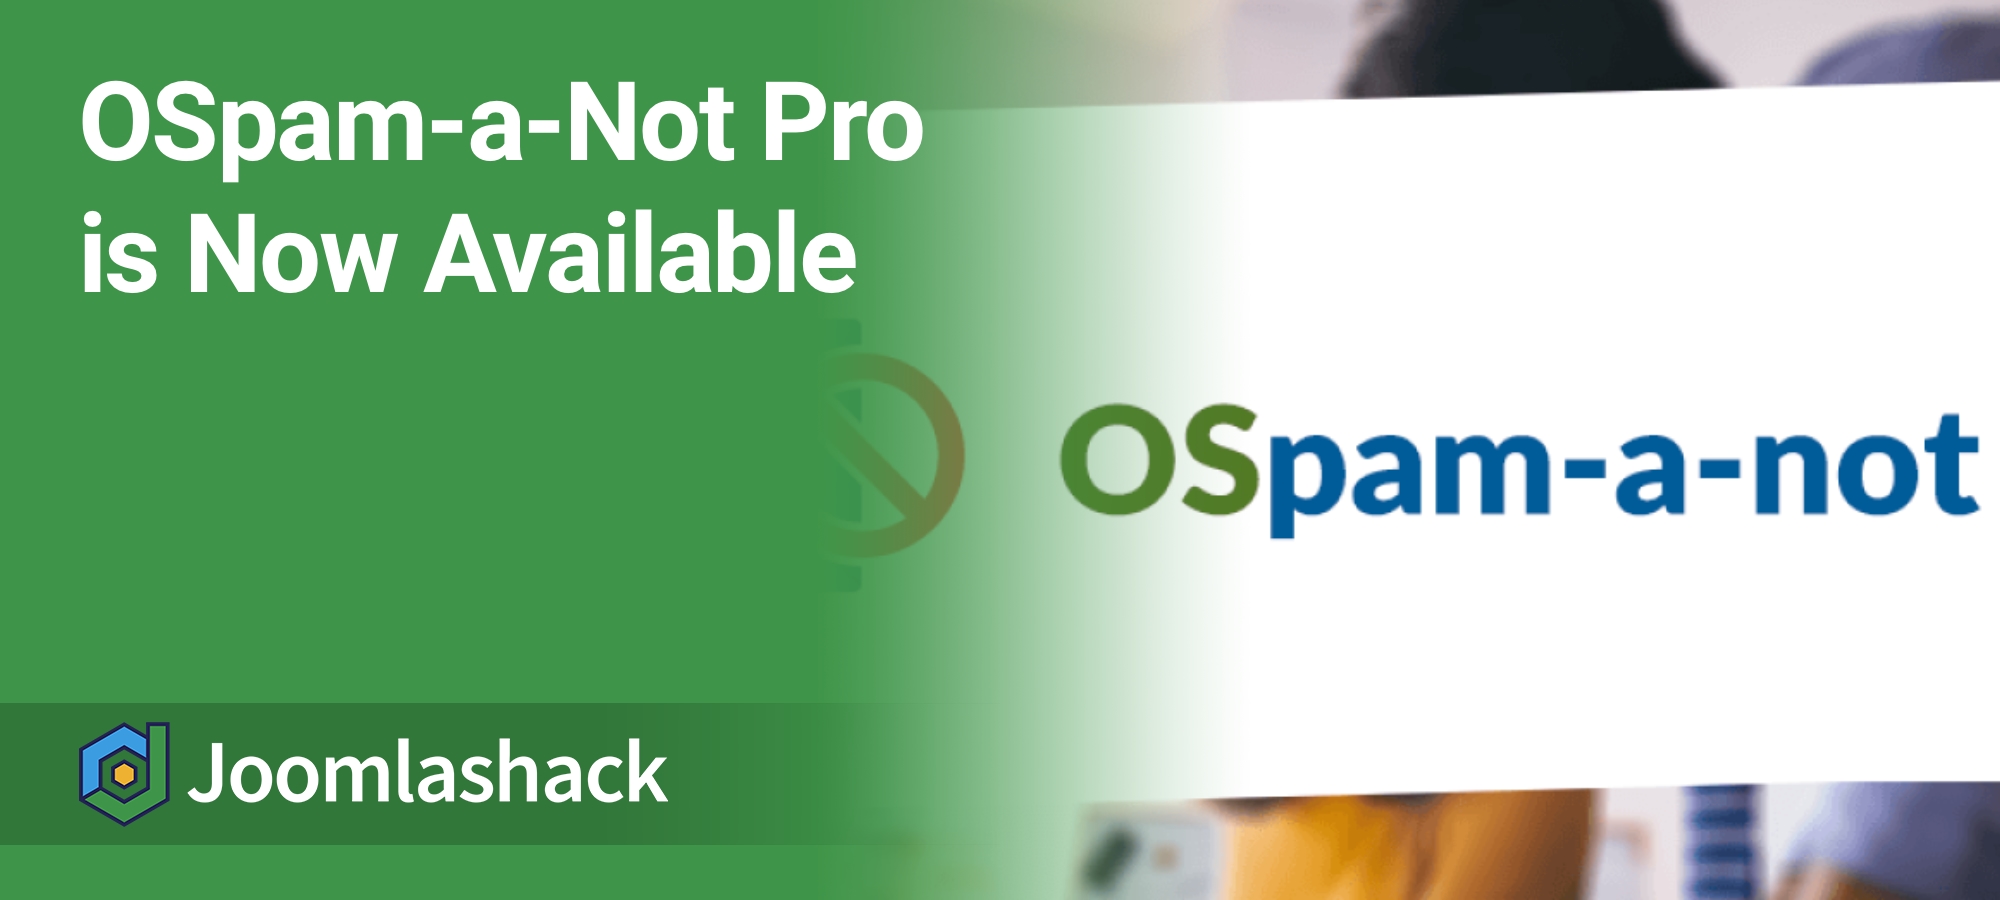 OSpam-a-Not Pro is Now Available